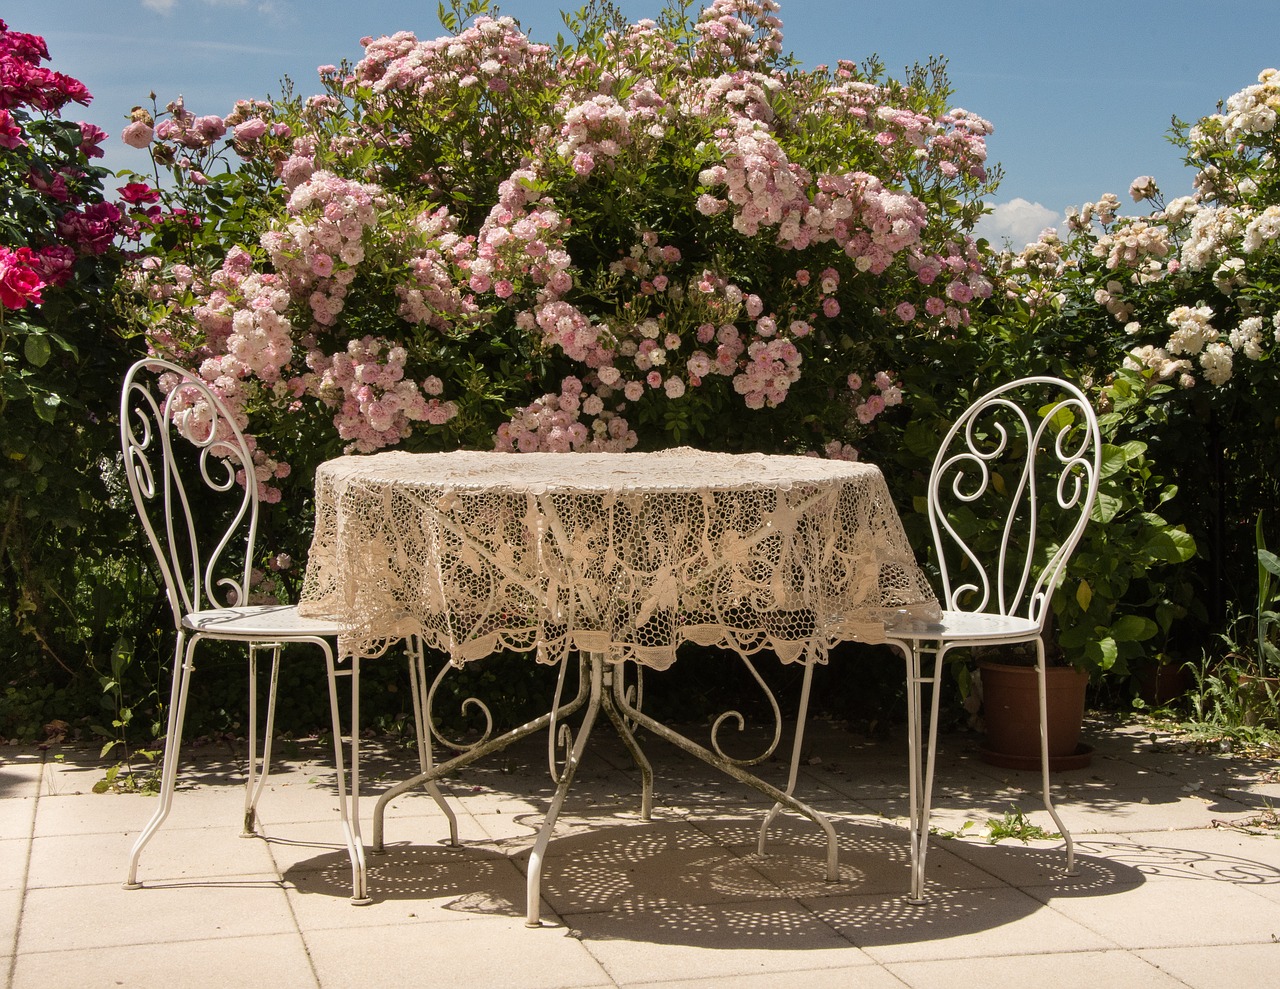 table summer roses free photo